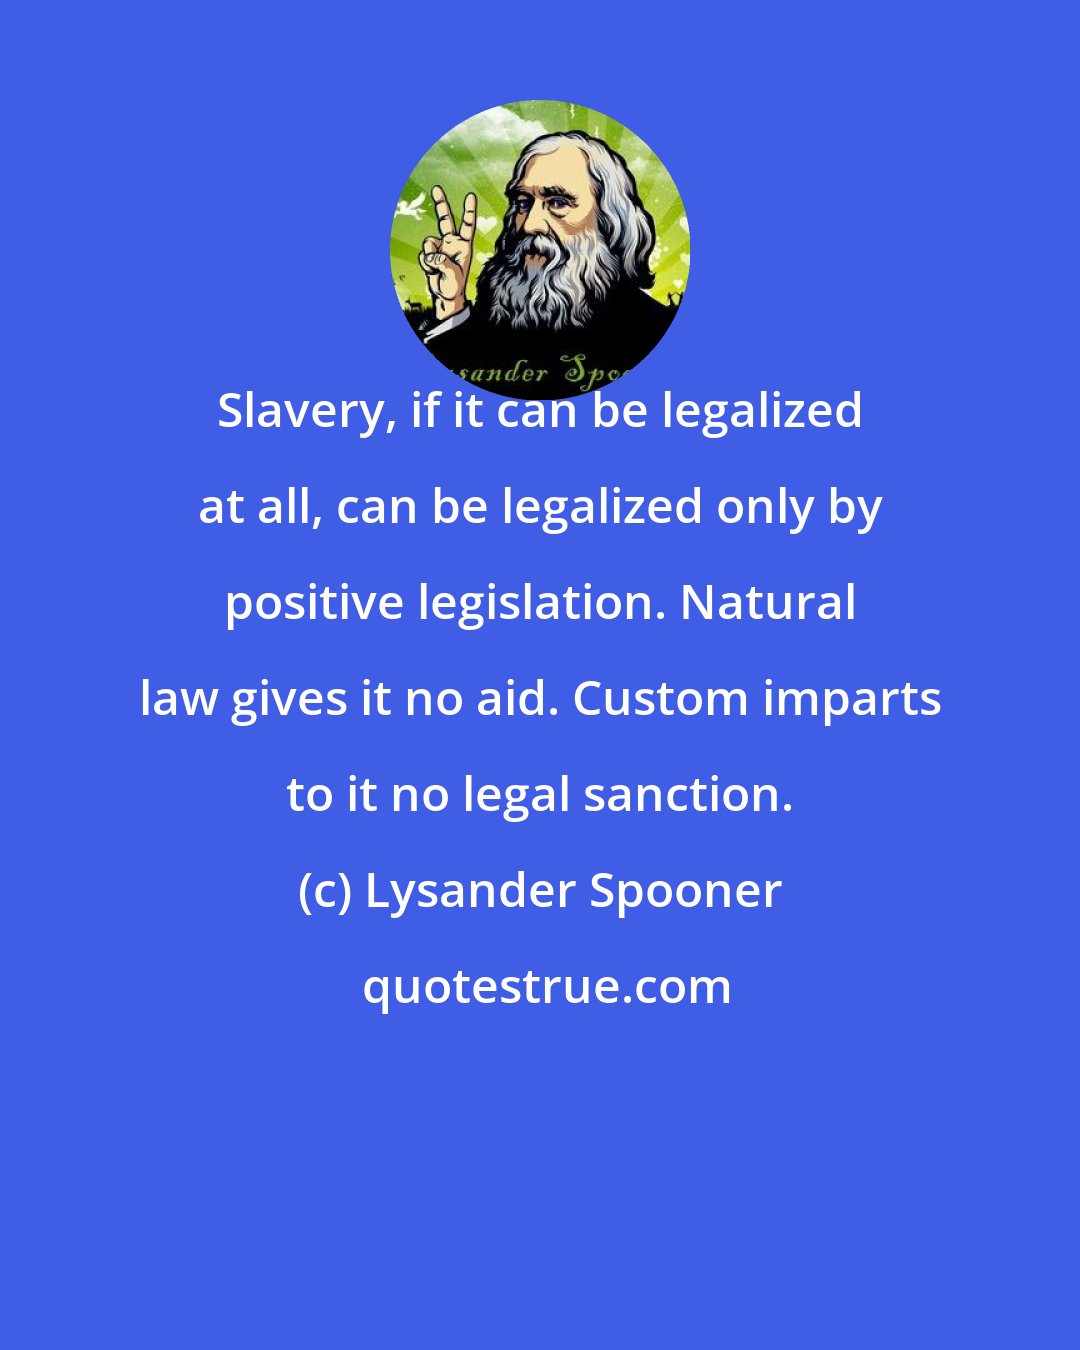 Lysander Spooner: Slavery, if it can be legalized at all, can be legalized only by positive legislation. Natural law gives it no aid. Custom imparts to it no legal sanction.